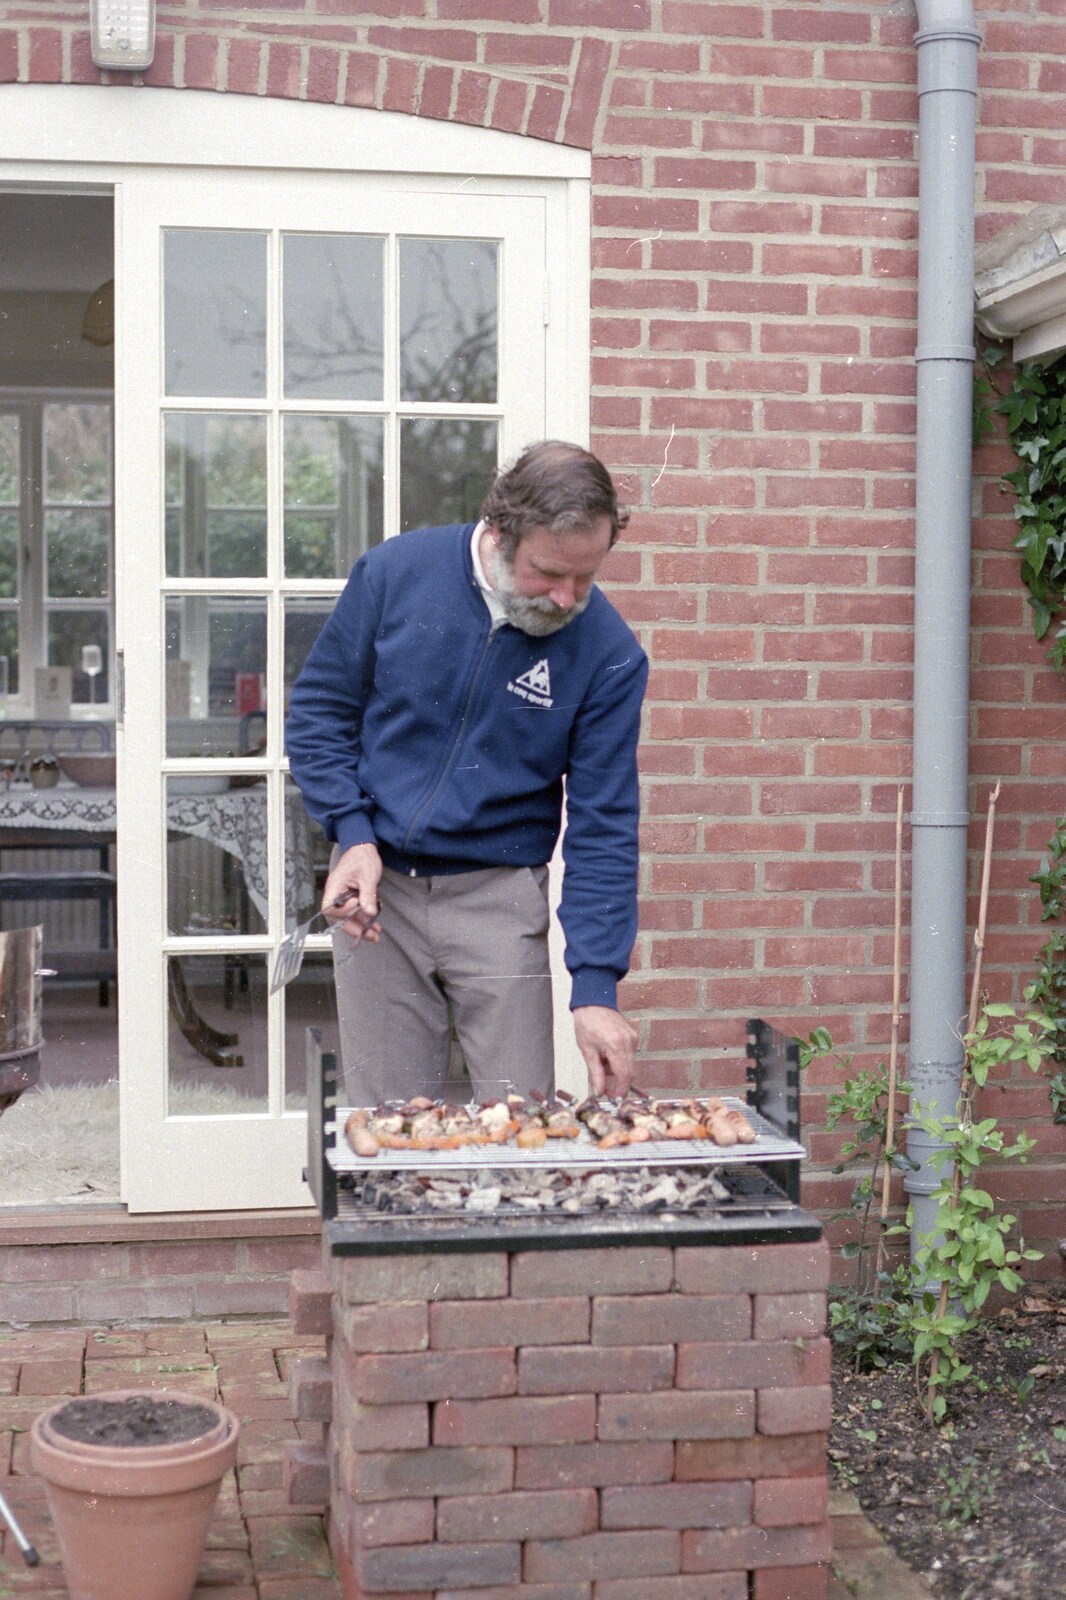 Nosher's 18th Birthday, Barton on Sea, Hampshire - 26th May 1985: Ando pokes some barbeque food